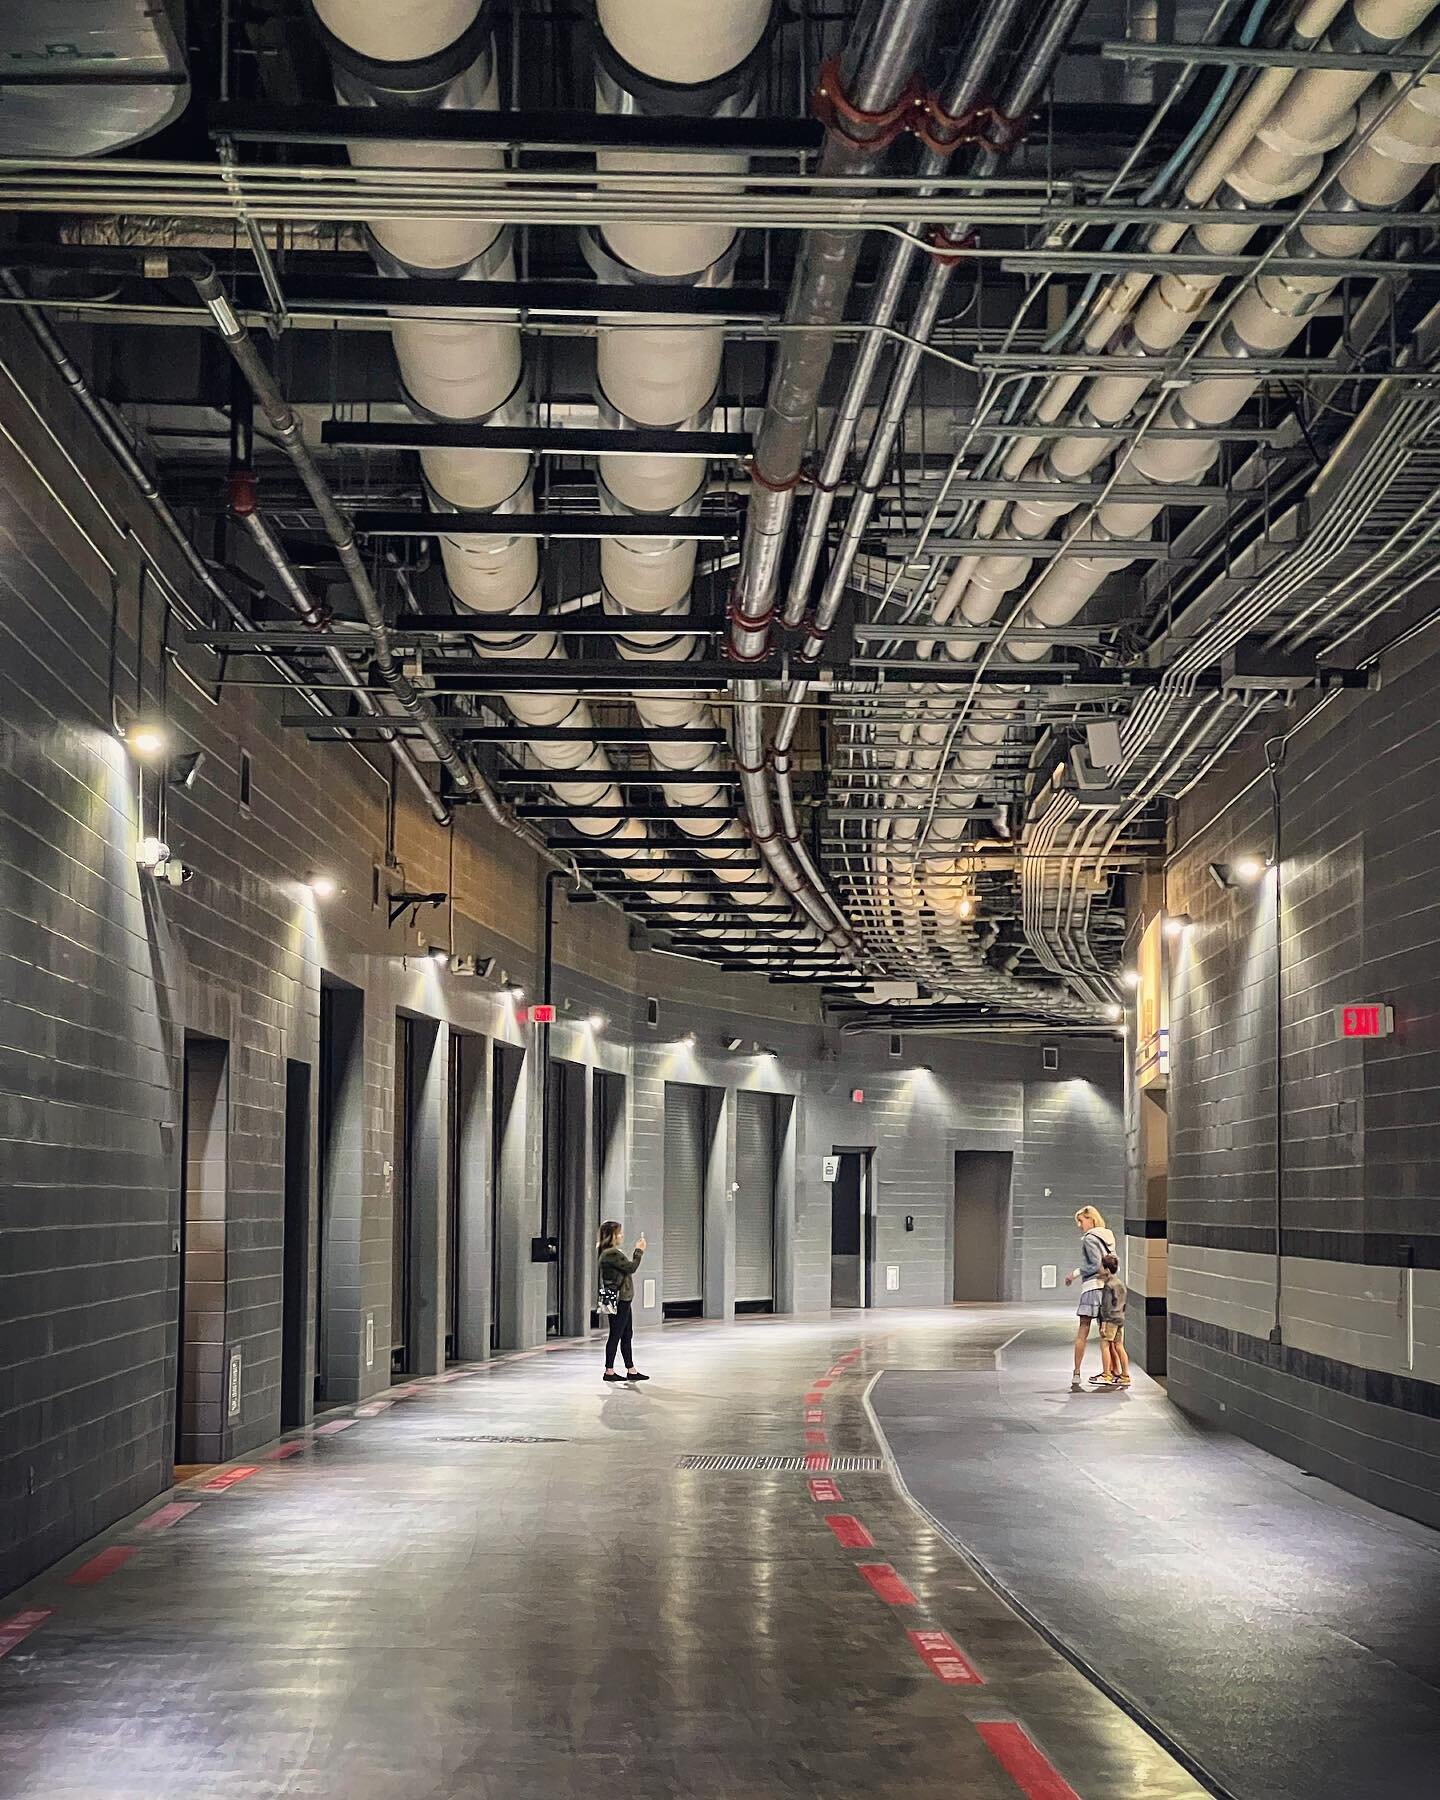 Belly of the beast&hellip; the whole place is surreal. Every single project I&rsquo;ve ever worked on combined could fit inside this corridor, with plenty of room left over!